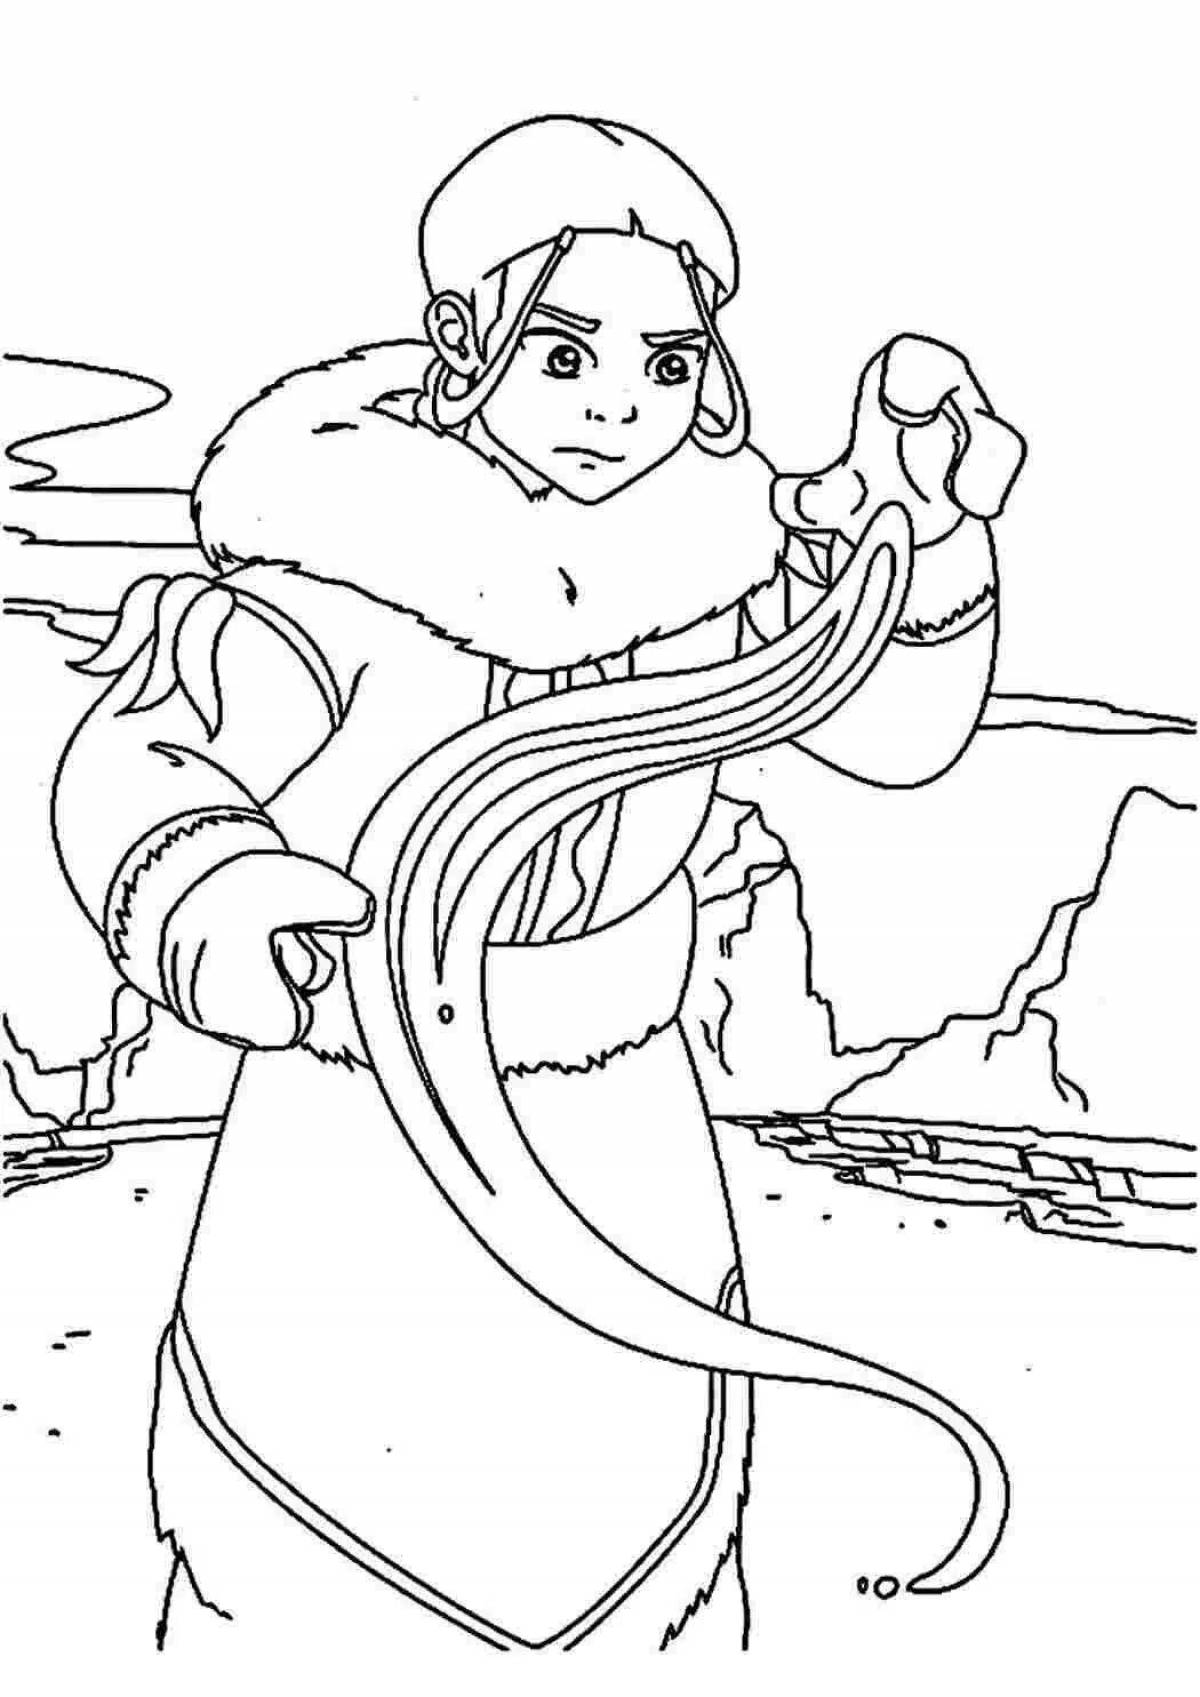 Color-explosion avatar coloring page for kids